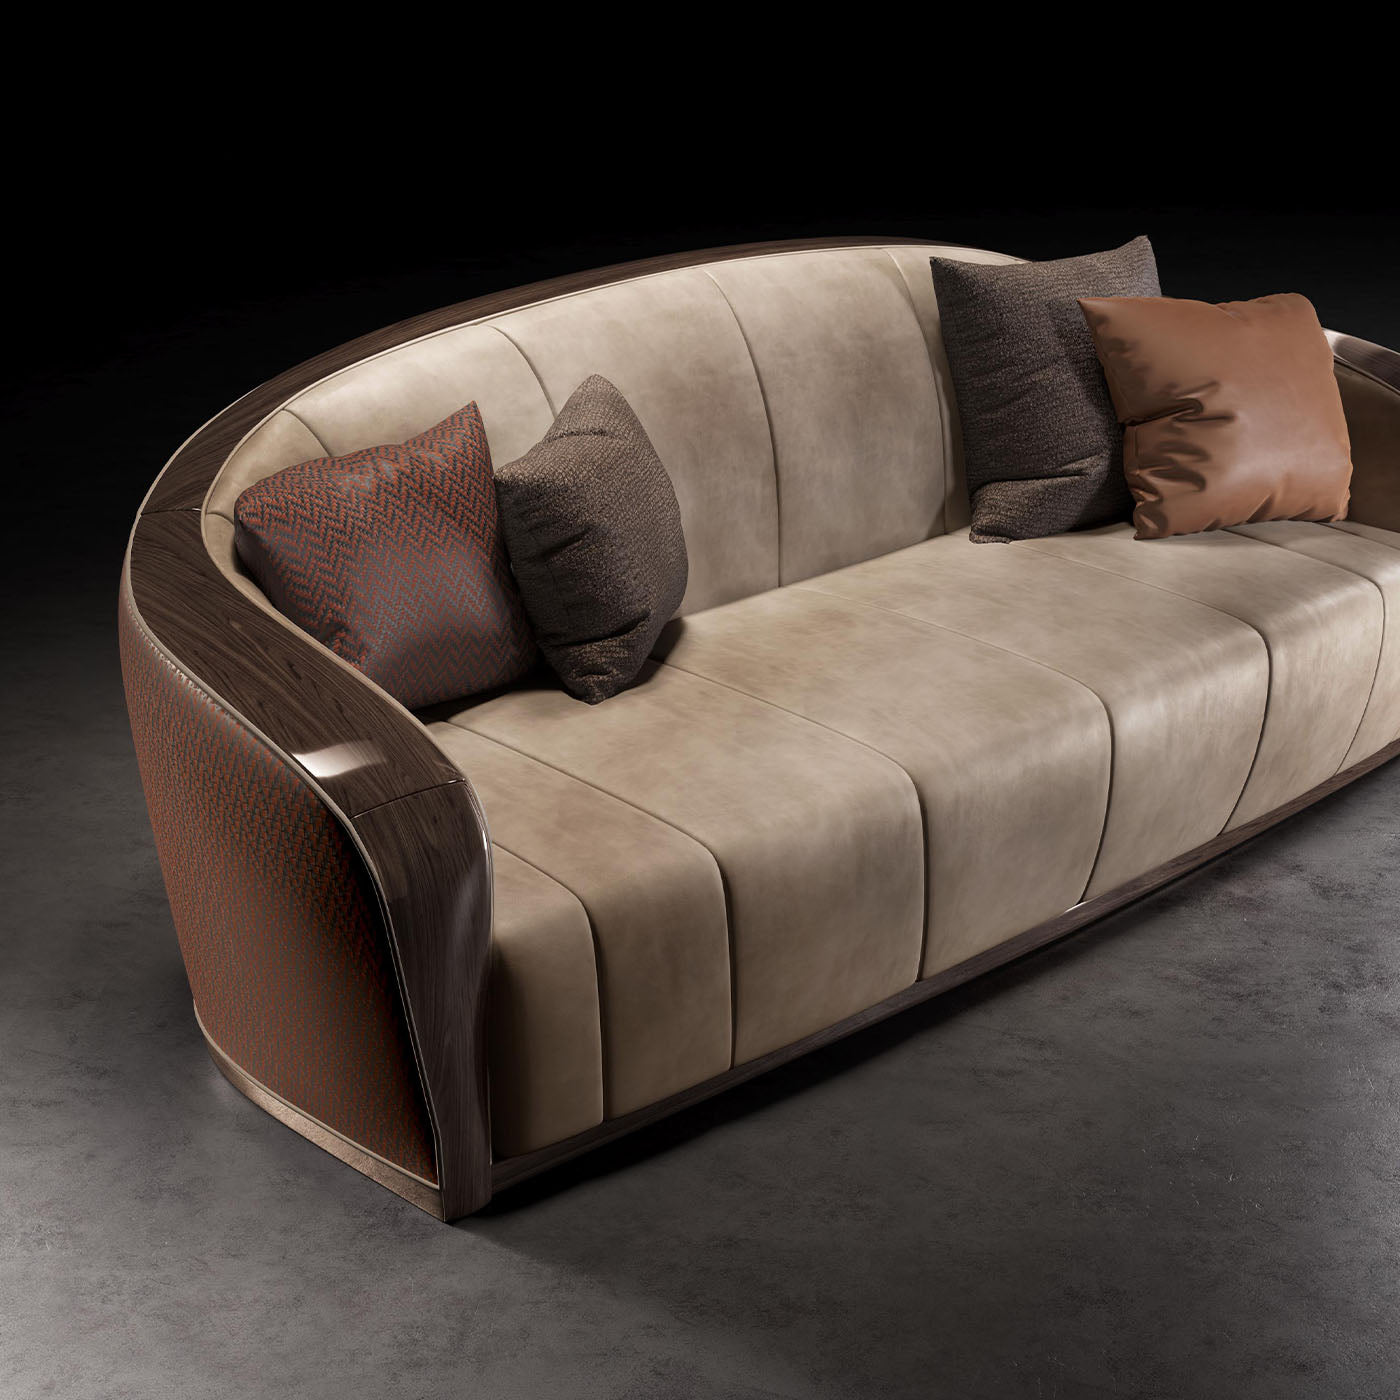  Castagno Channeled Brown-Leather Sofa - Alternative view 2